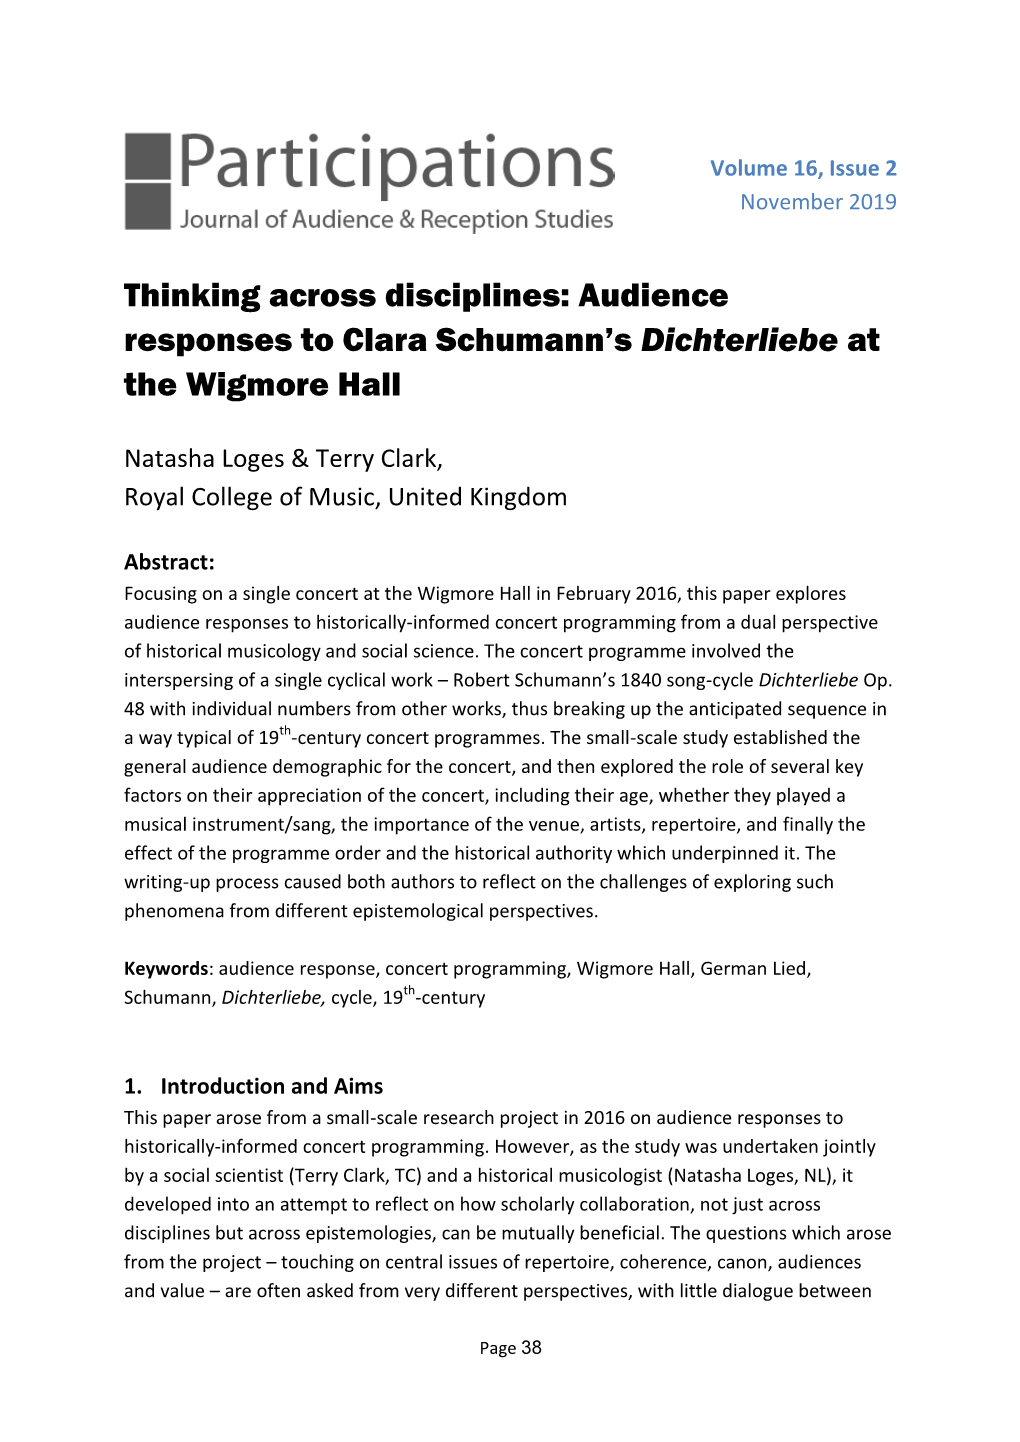 Thinking Across Disciplines: Audience Responses to Clara Schumann's